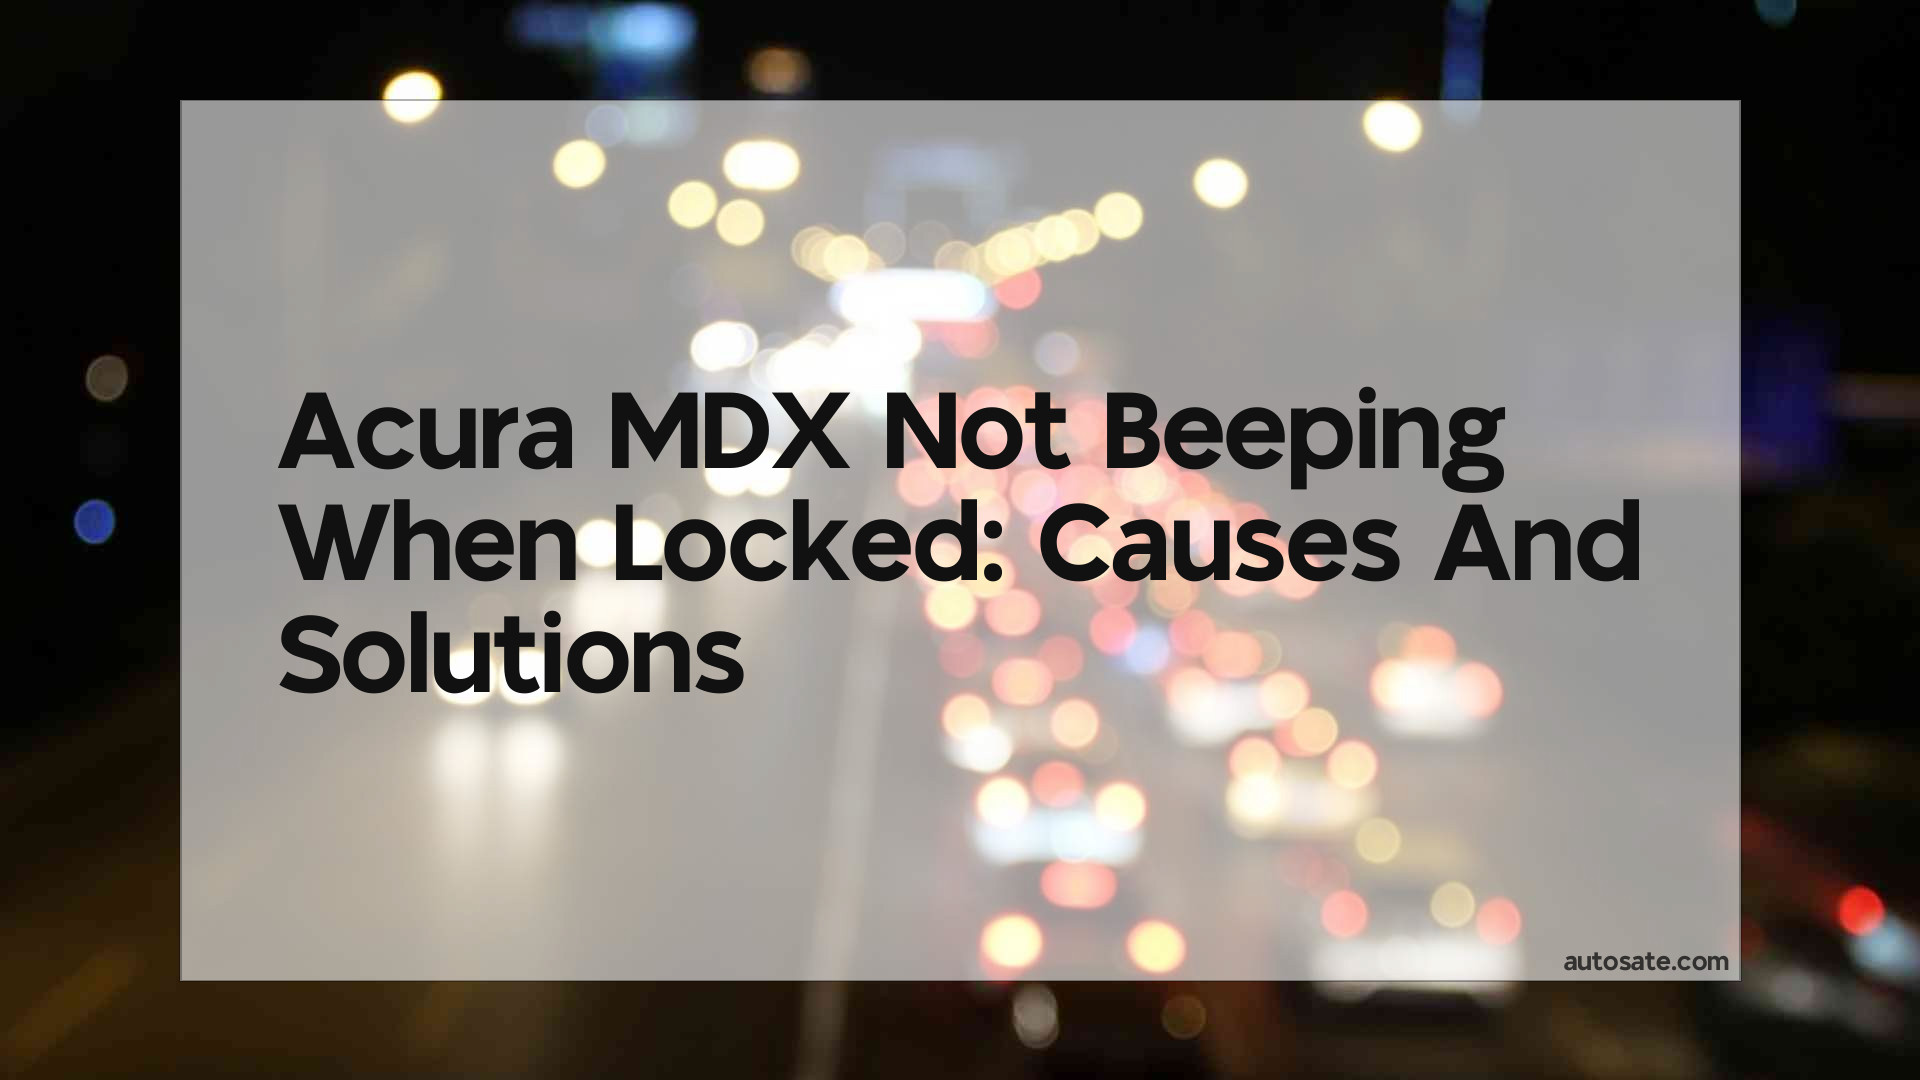 Acura Mdx Not Beeping When Locked: Causes And Solutions